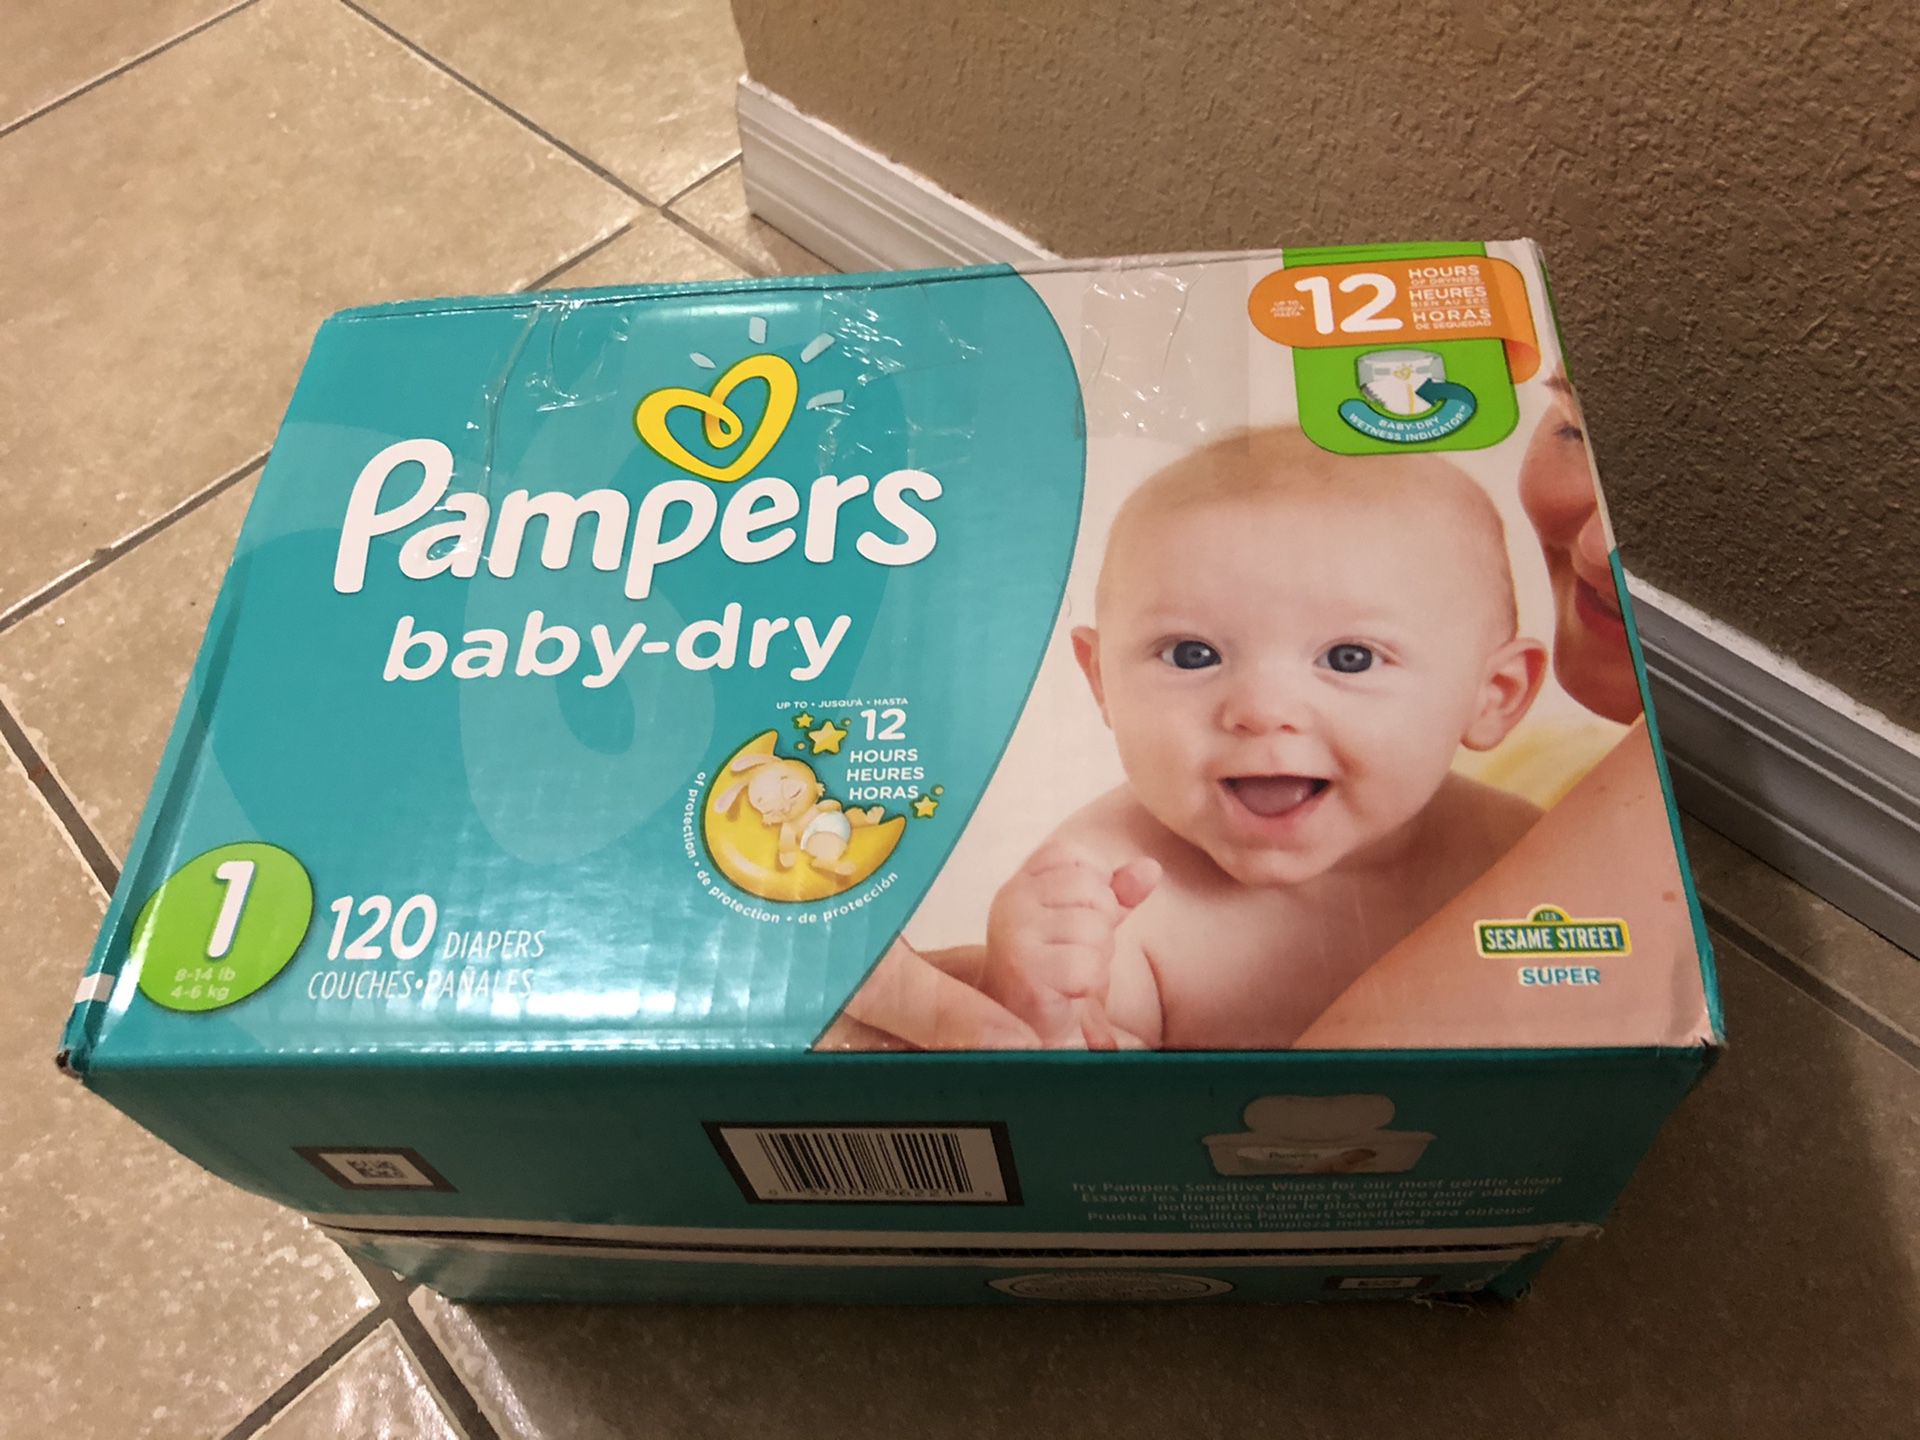 Diapers size 1 total 150 units - 120 pampers (+30 Huggies) I used just 2 units